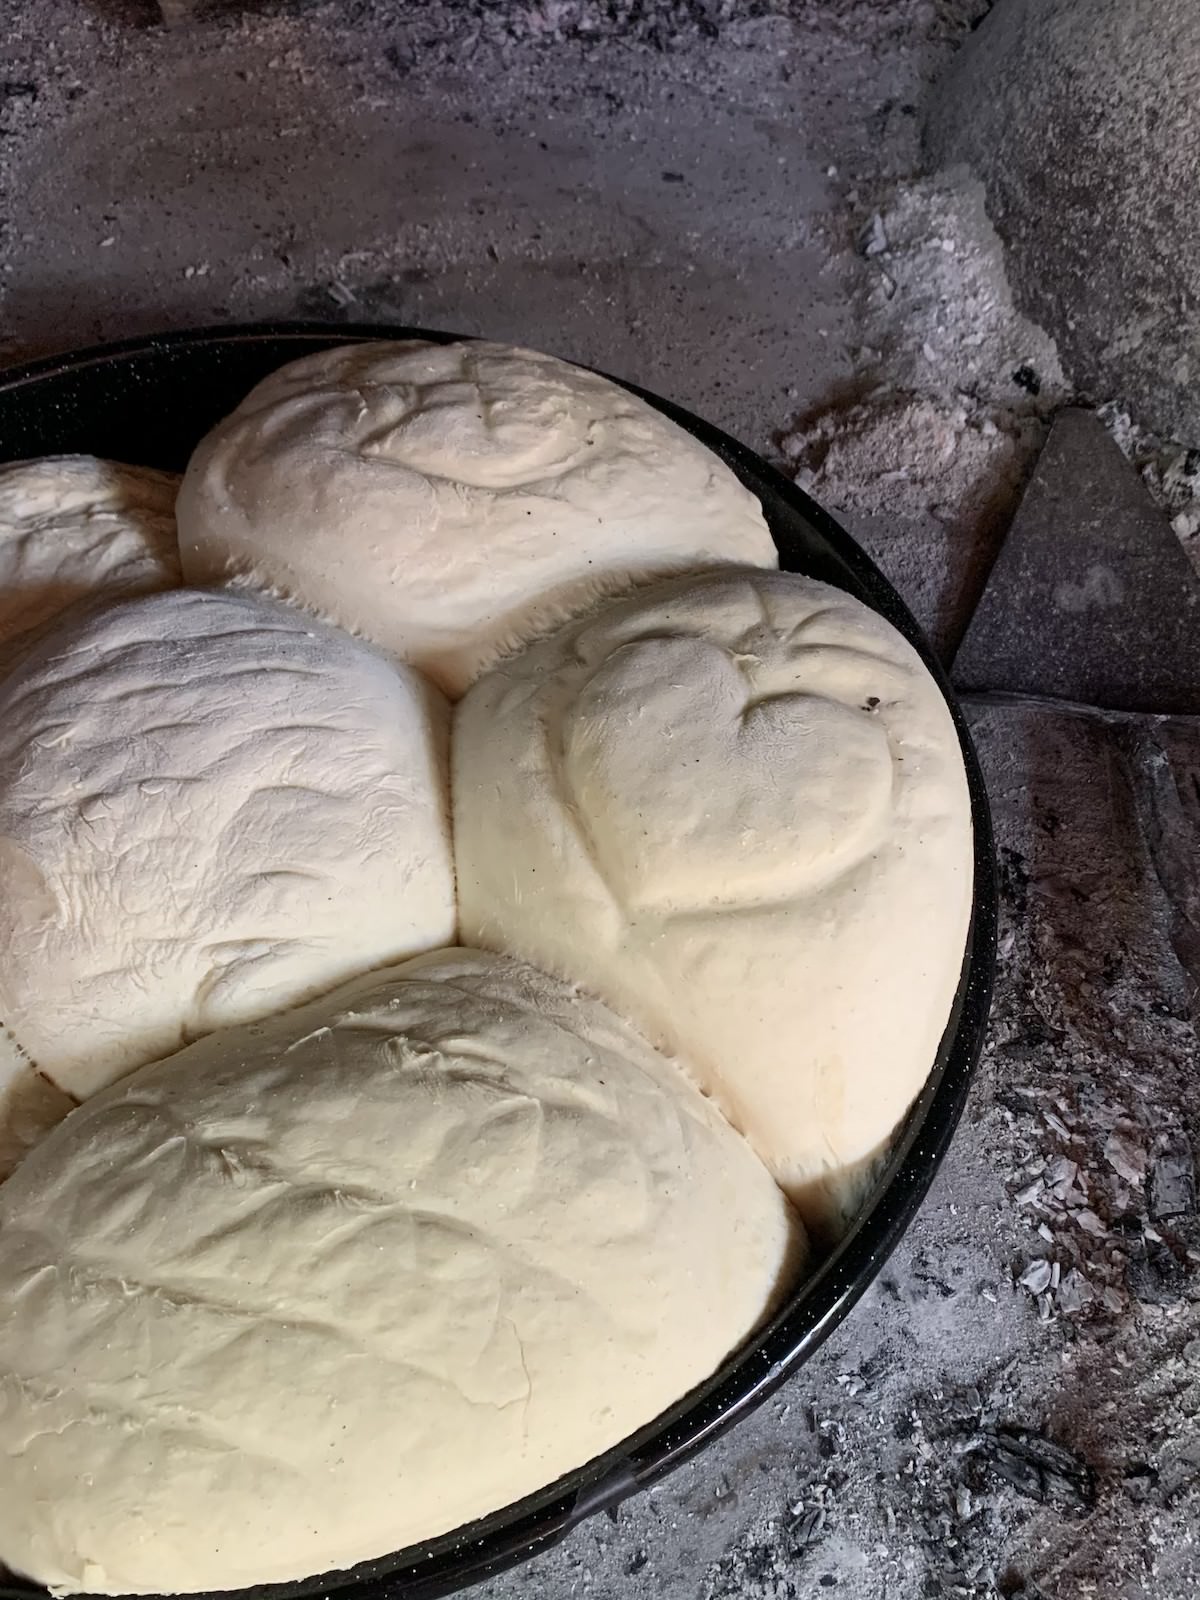 freshly baked bread made under the peka